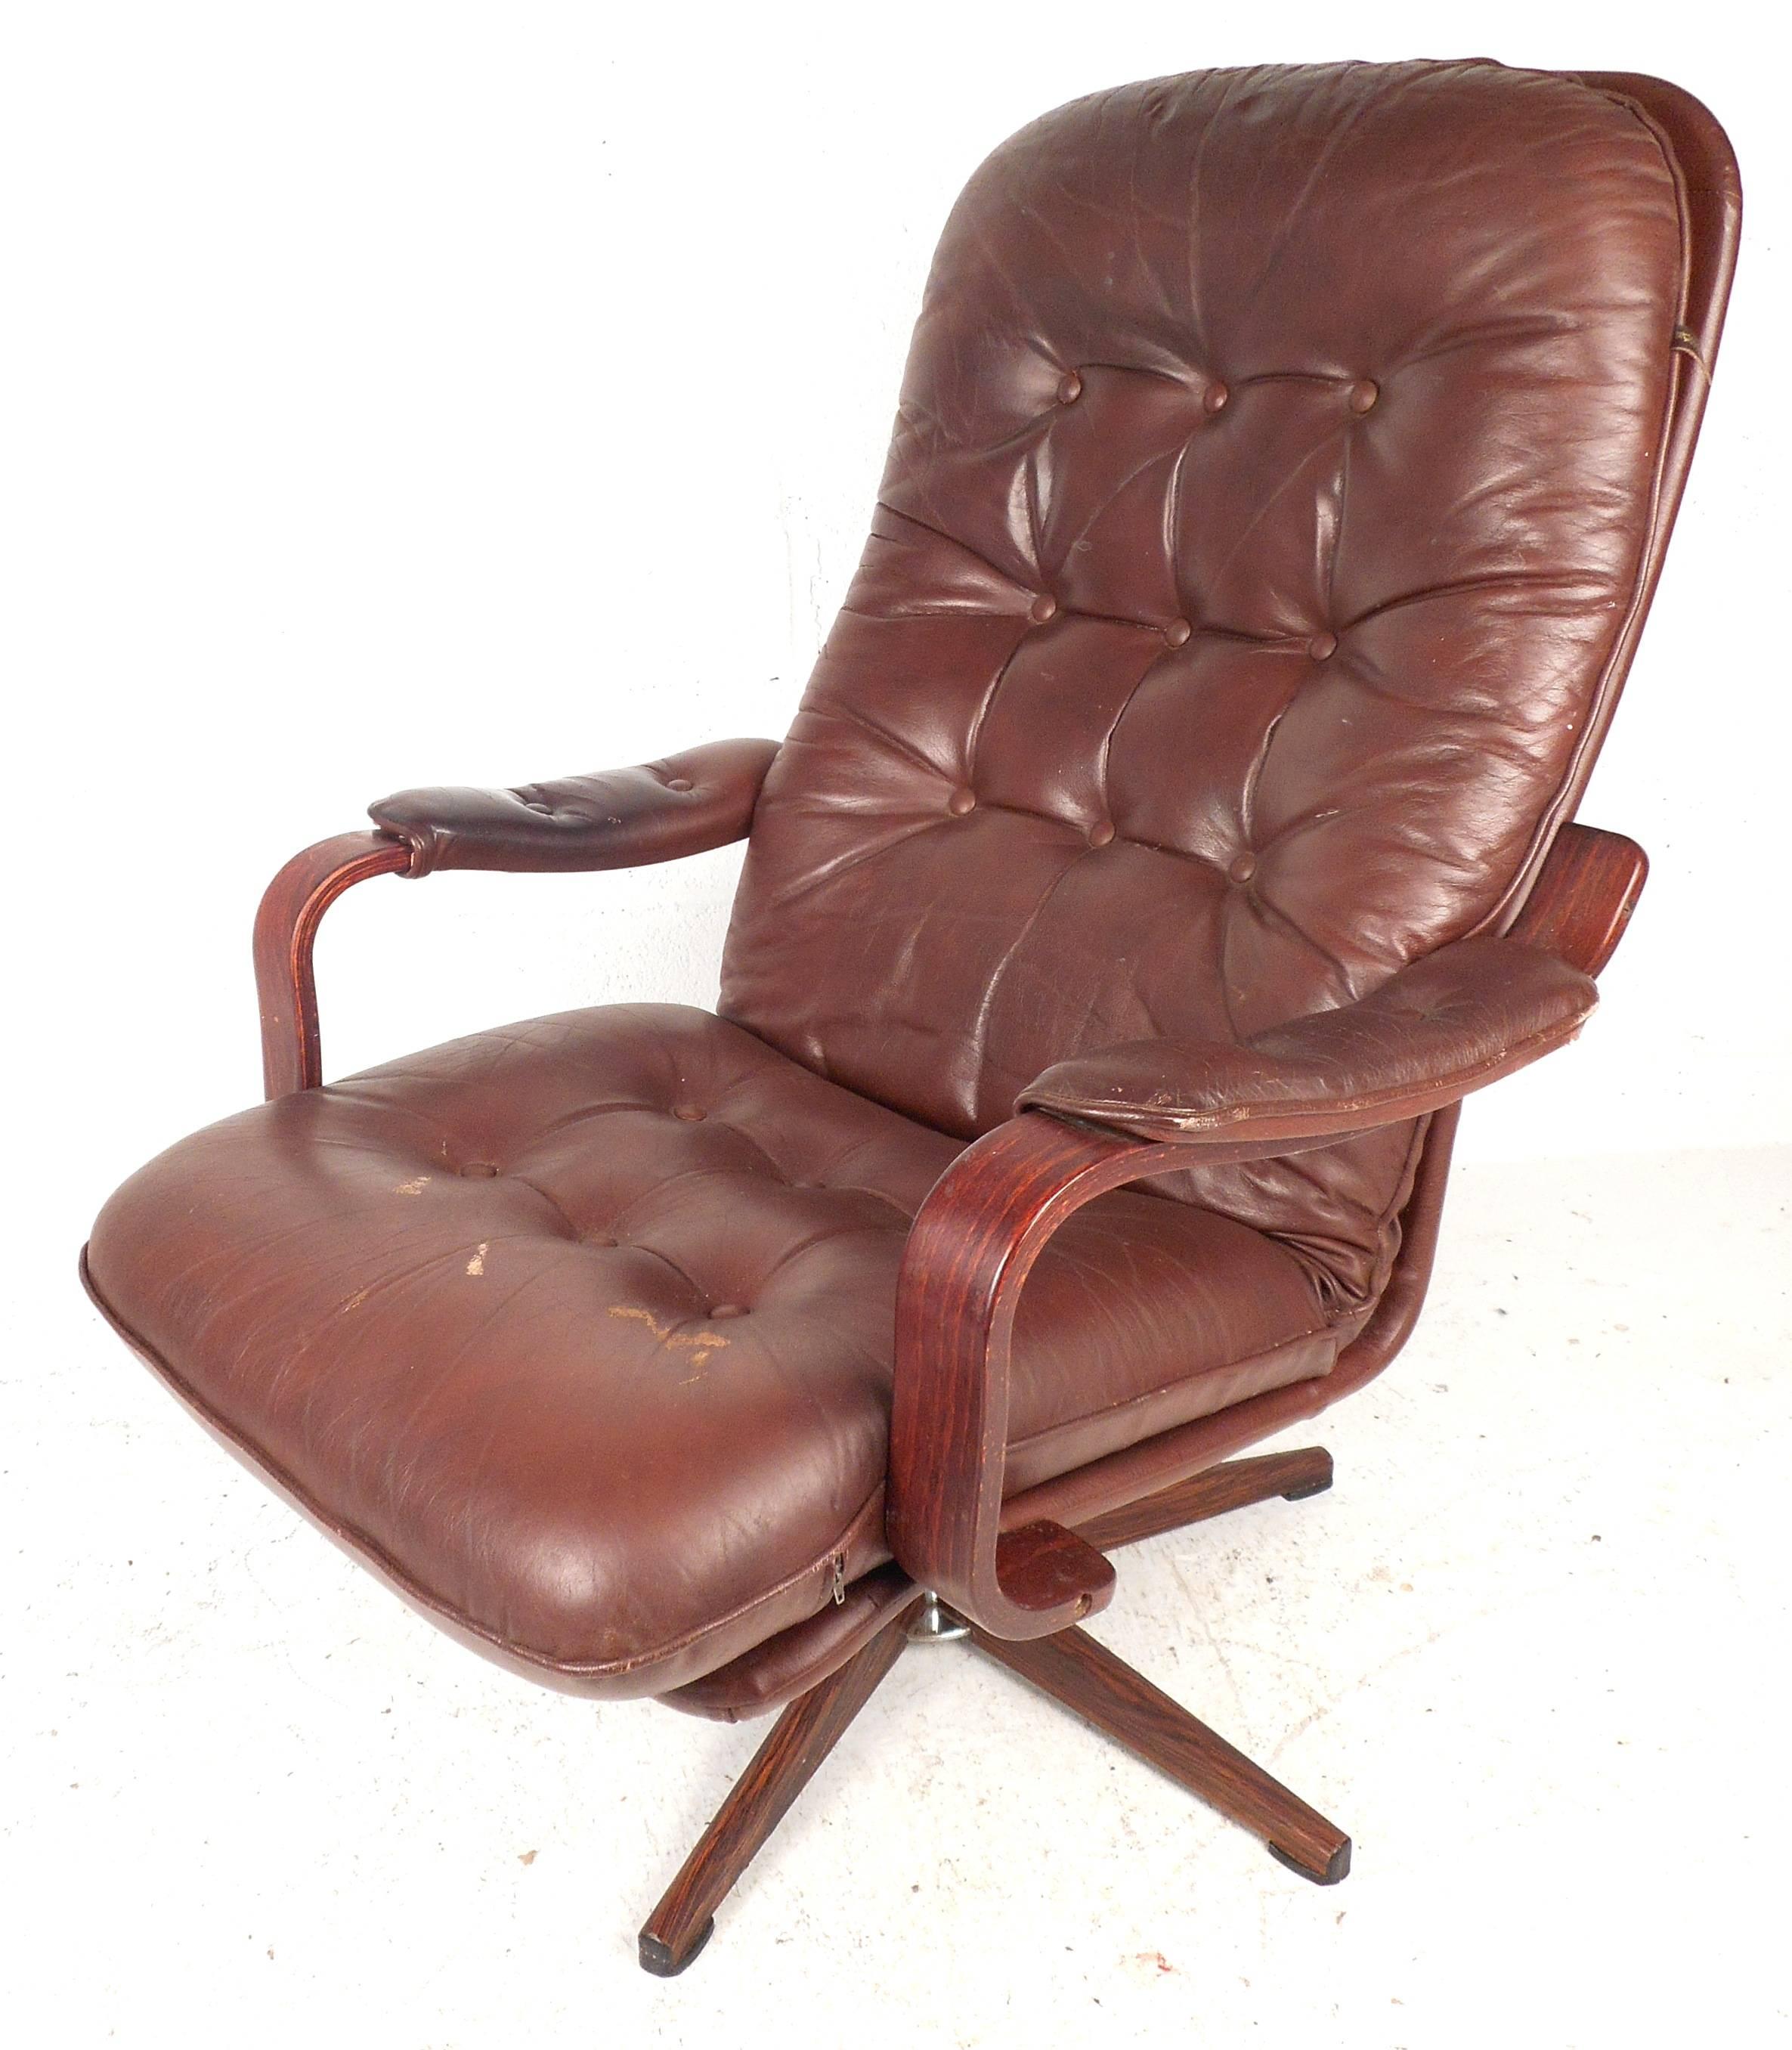 This gorgeous Mid-Century burgundy vinyl lounge chair and ottoman features tufted cushions, rosewood armrests and a swivel base. The comfortable and iconic design is labeled 